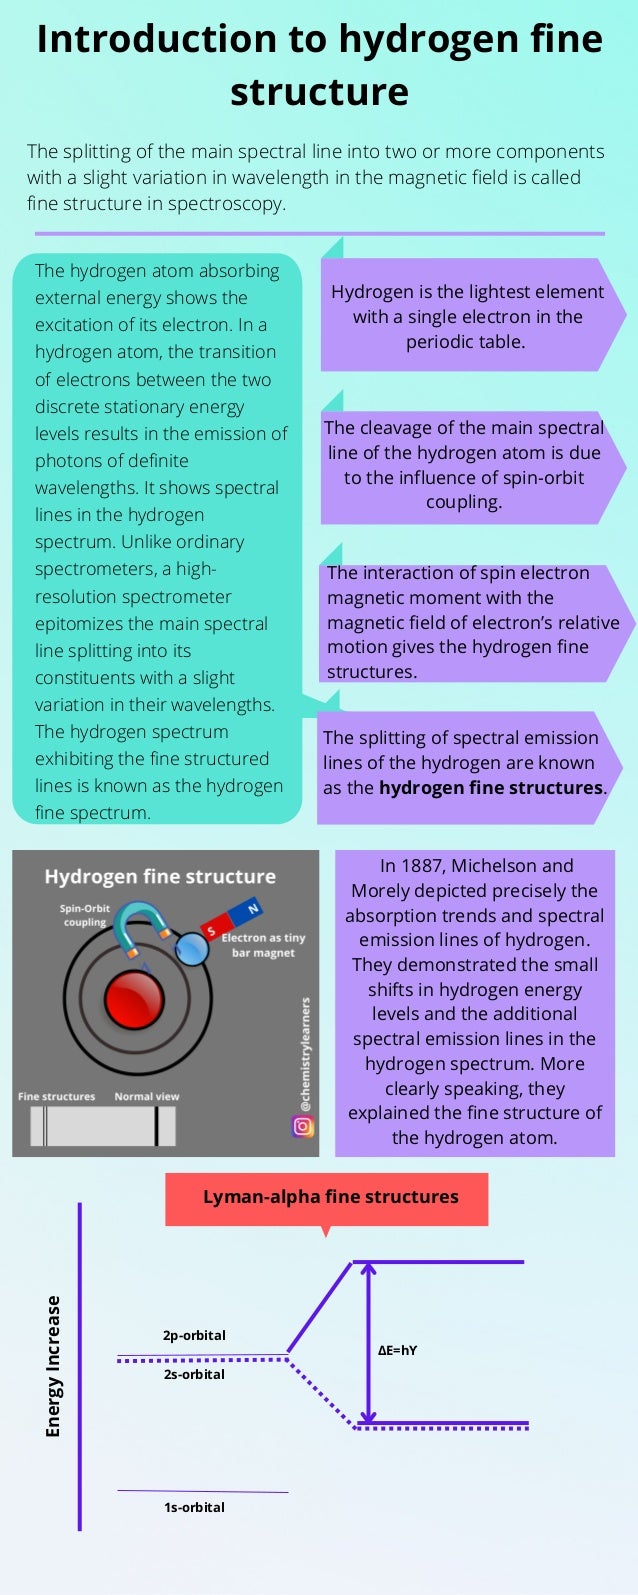 Introduction to hydrogen fine
structure
The splitting of the main spectral line into two or more components
with a slight variation in wavelength in the magnetic field is called
fine structure in spectroscopy.
Hydrogen is the lightest element
with a single electron in the
periodic table.
The cleavage of the main spectral
line of the hydrogen atom is due
to the influence of spin-orbit
coupling.
The interaction of spin electron
magnetic moment with the
magnetic field of electron’s relative
motion gives the hydrogen fine
structures.
The splitting of spectral emission
lines of the hydrogen are known
as the hydrogen fine structures.
The hydrogen atom absorbing
external energy shows the
excitation of its electron. In a
hydrogen atom, the transition
of electrons between the two
discrete stationary energy
levels results in the emission of
photons of definite
wavelengths. It shows spectral
lines in the hydrogen
spectrum. Unlike ordinary
spectrometers, a high-
resolution spectrometer
epitomizes the main spectral
line splitting into its
constituents with a slight
variation in their wavelengths.
The hydrogen spectrum
exhibiting the fine structured
lines is known as the hydrogen
fine spectrum.
In 1887, Michelson and
Morely depicted precisely the
absorption trends and spectral
emission lines of hydrogen.
They demonstrated the small
shifts in hydrogen energy
levels and the additional
spectral emission lines in the
hydrogen spectrum. More
clearly speaking, they
explained the fine structure of
the hydrogen atom.


Energy
Increase
Lyman-alpha fine structures
1s-orbital
2s-orbital
2p-orbital
ΔE=hϒ
 